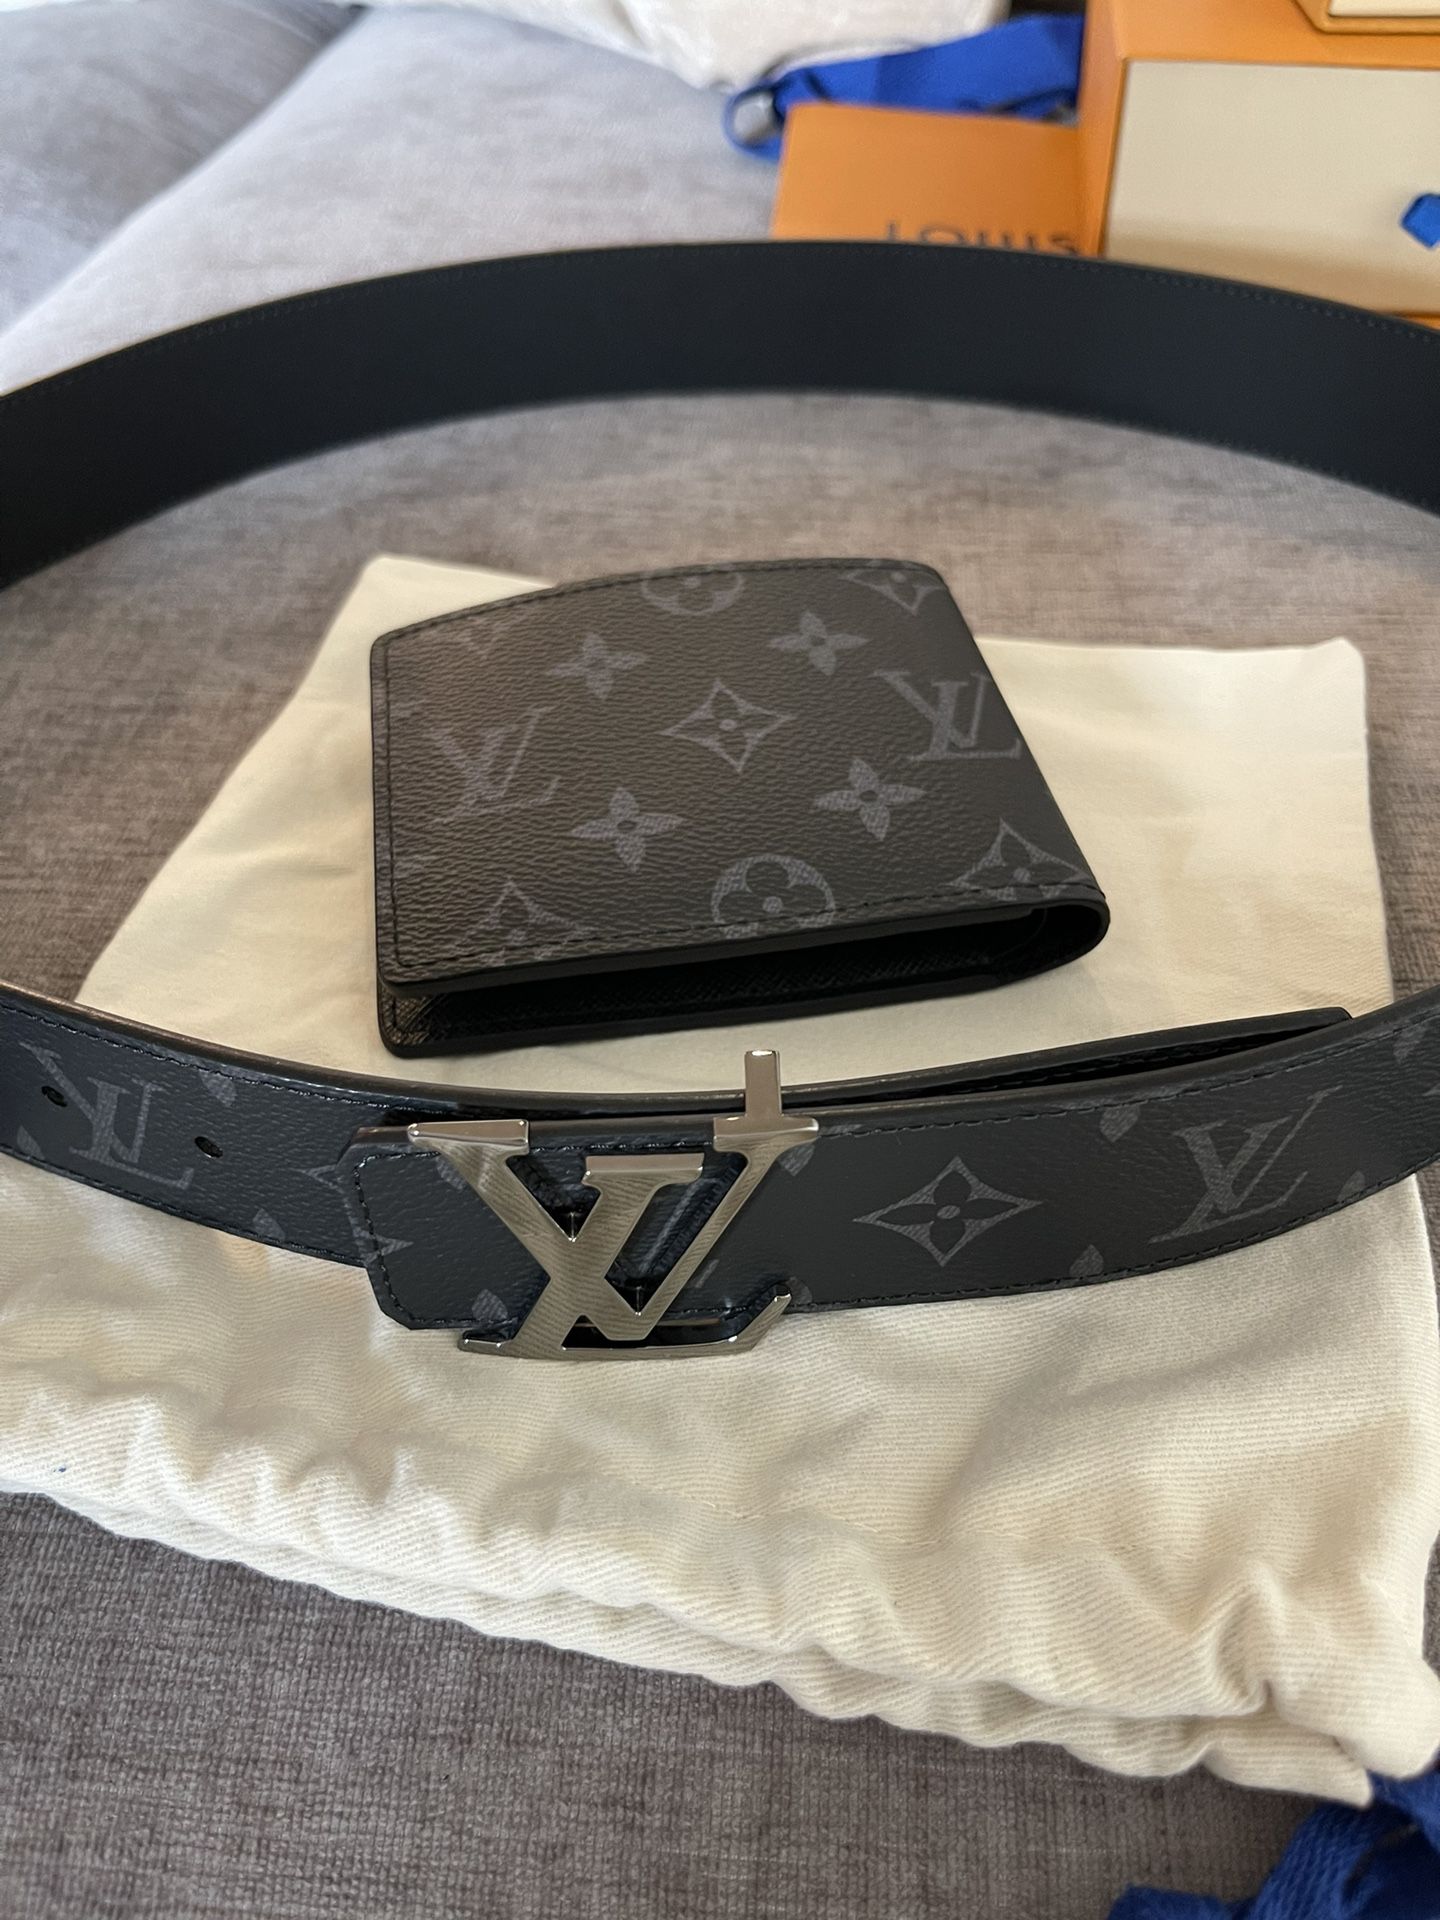 $300  LOUIS VUITTON BELT * COMES WITH RECEIPT for Sale in The